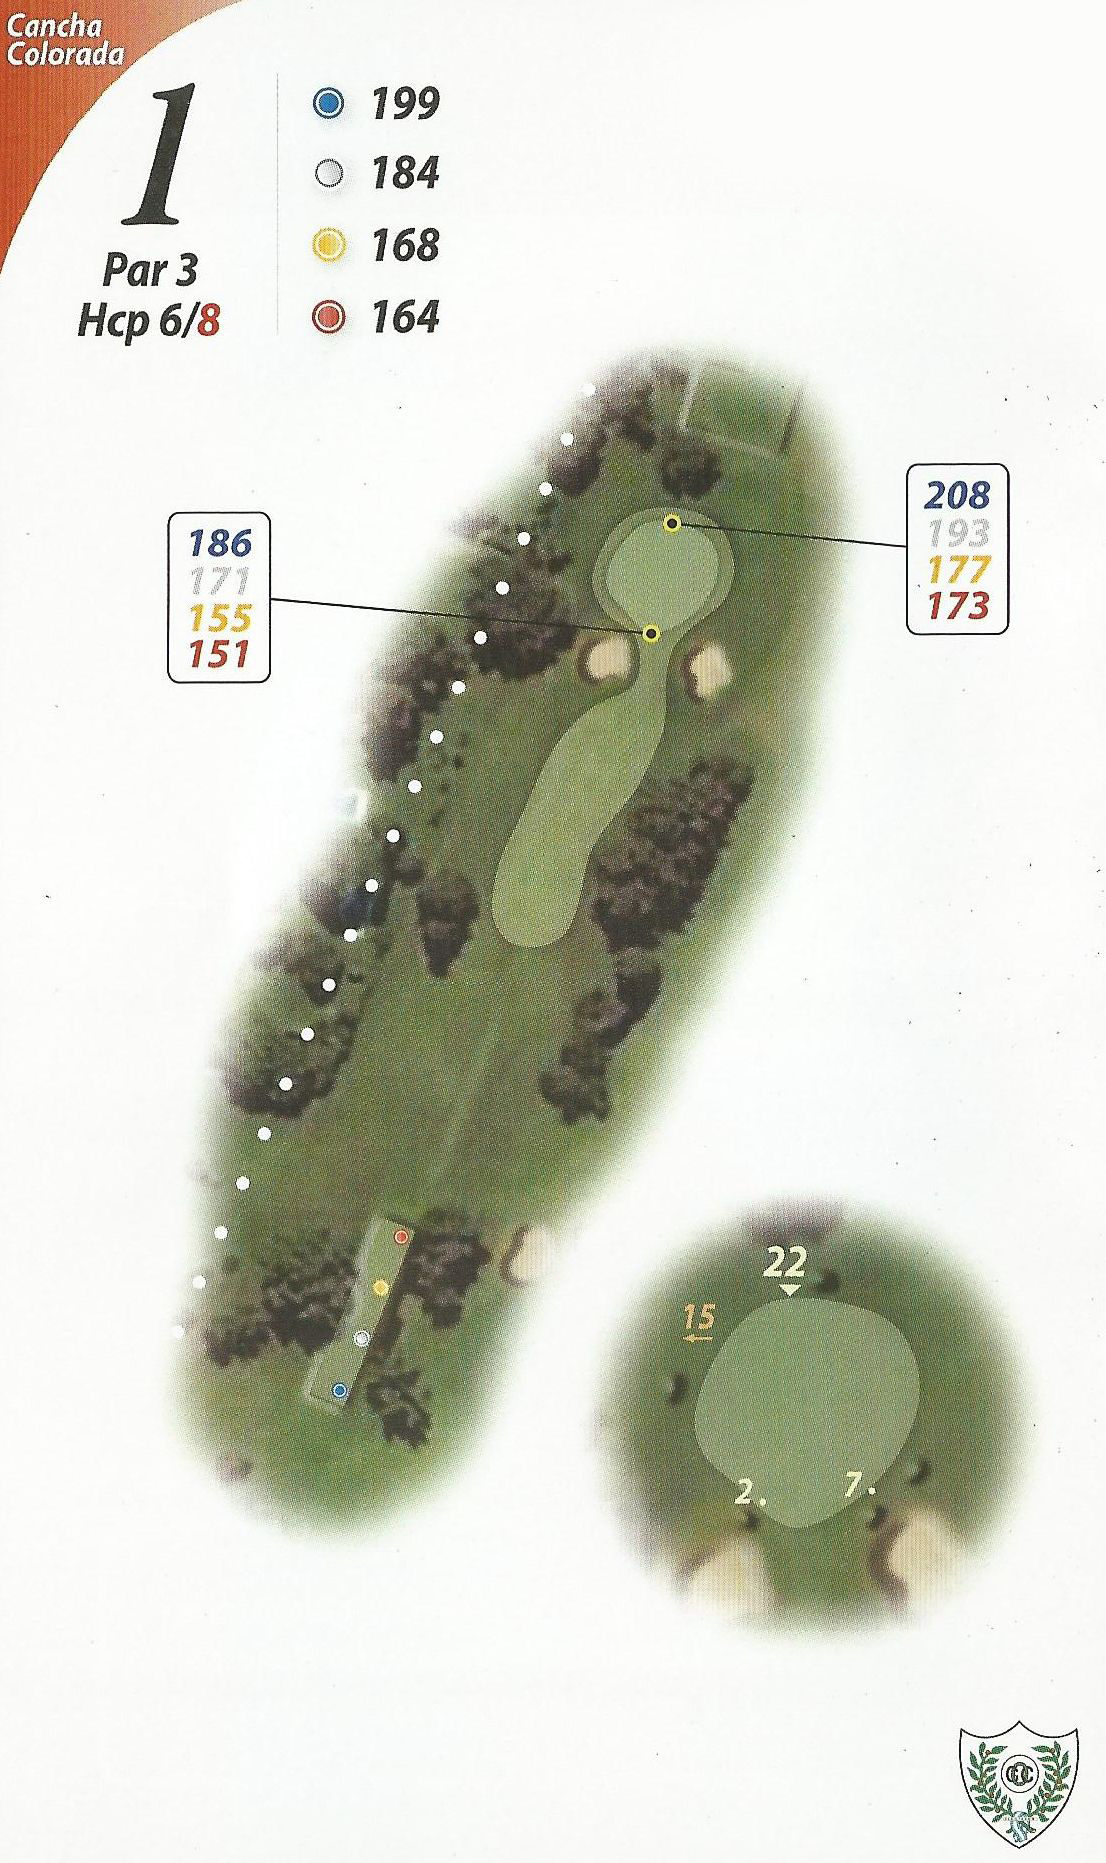 Hole 1 (Red)